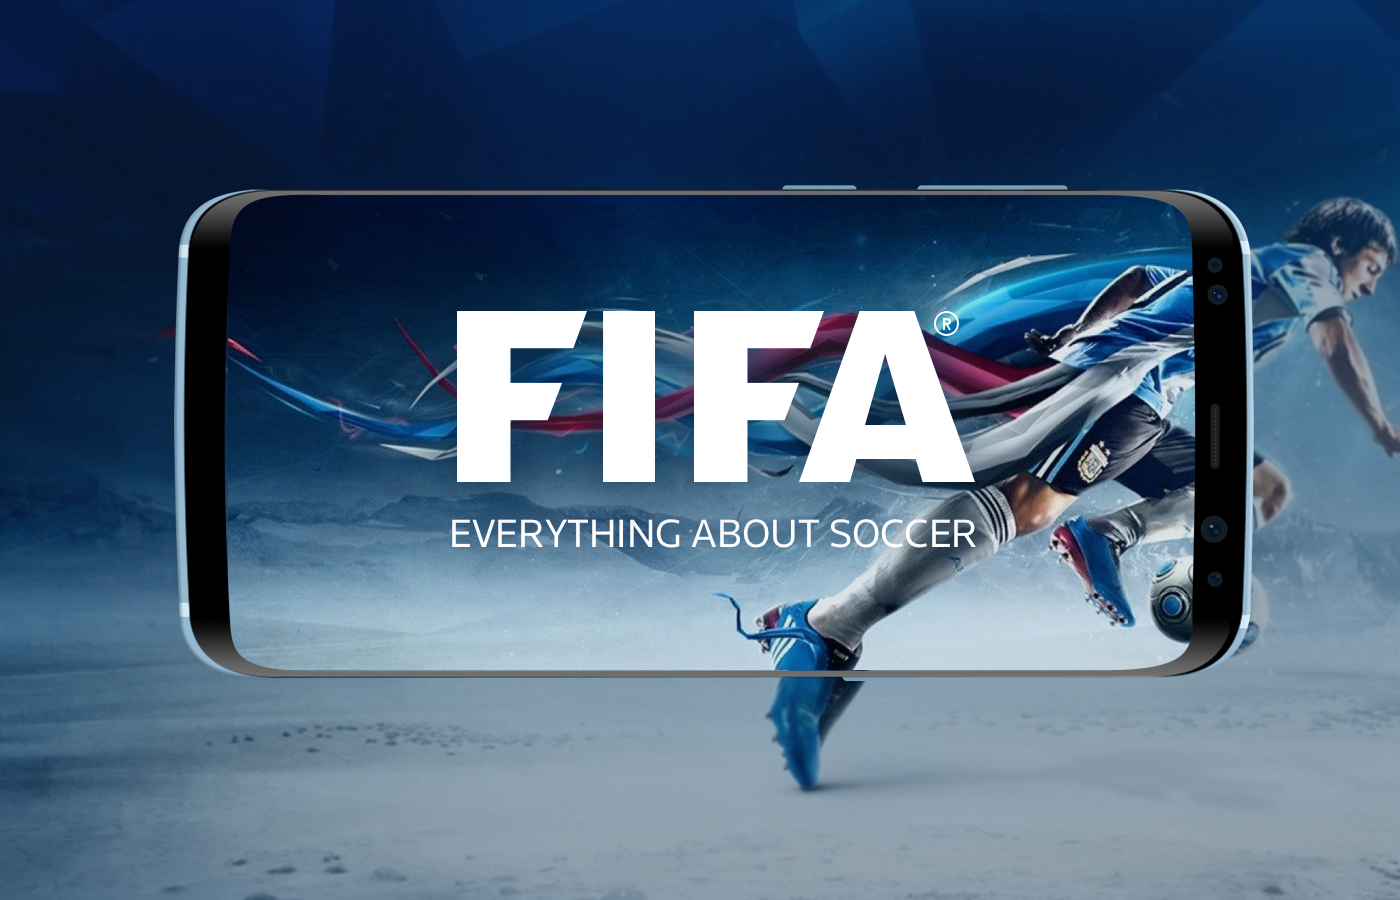 FIFA material design ui design score live live match match feed online shopping mobile android